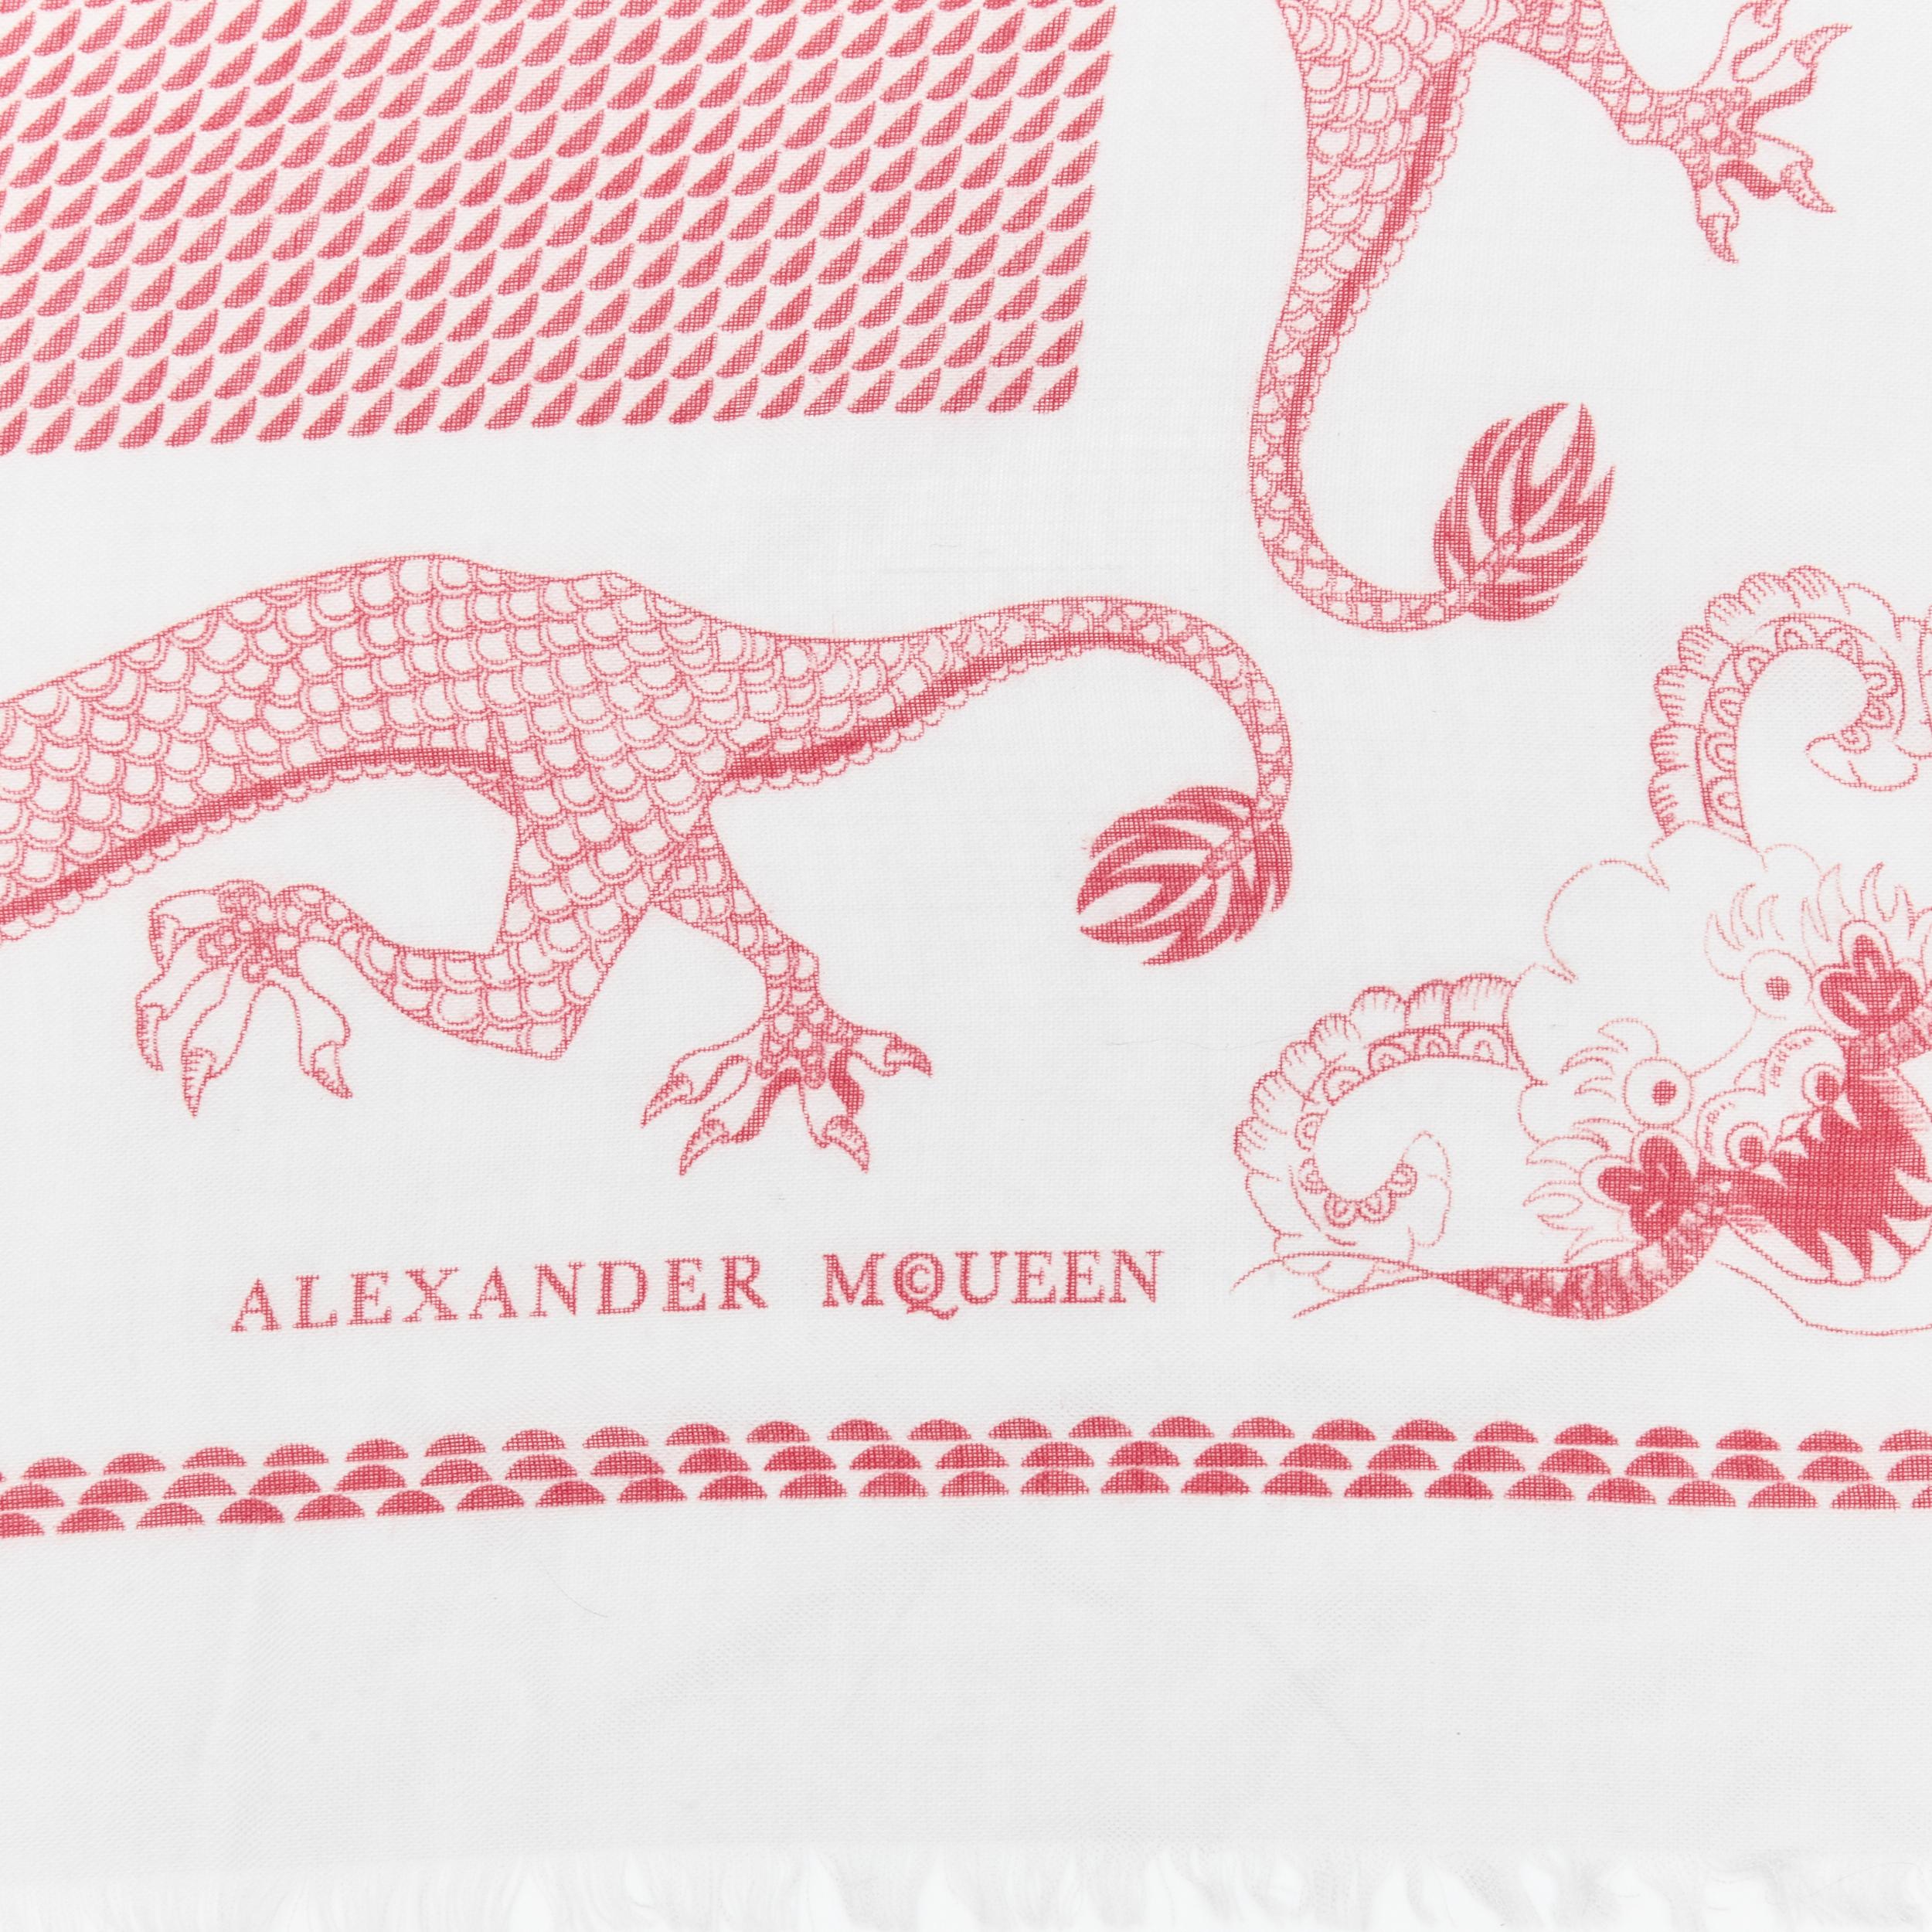 rare ALEXANDER MCQUEEN Lane Crawford wool silk cashmere grey red dragon scarf 
Reference: ANWU/A00580
Brand: Alexander McQueen 
Material: Wool 
Color: Grey 
Pattern: Geometric 
Made in: Italy 


CONDITION: 
Condition: Excellent, this item was